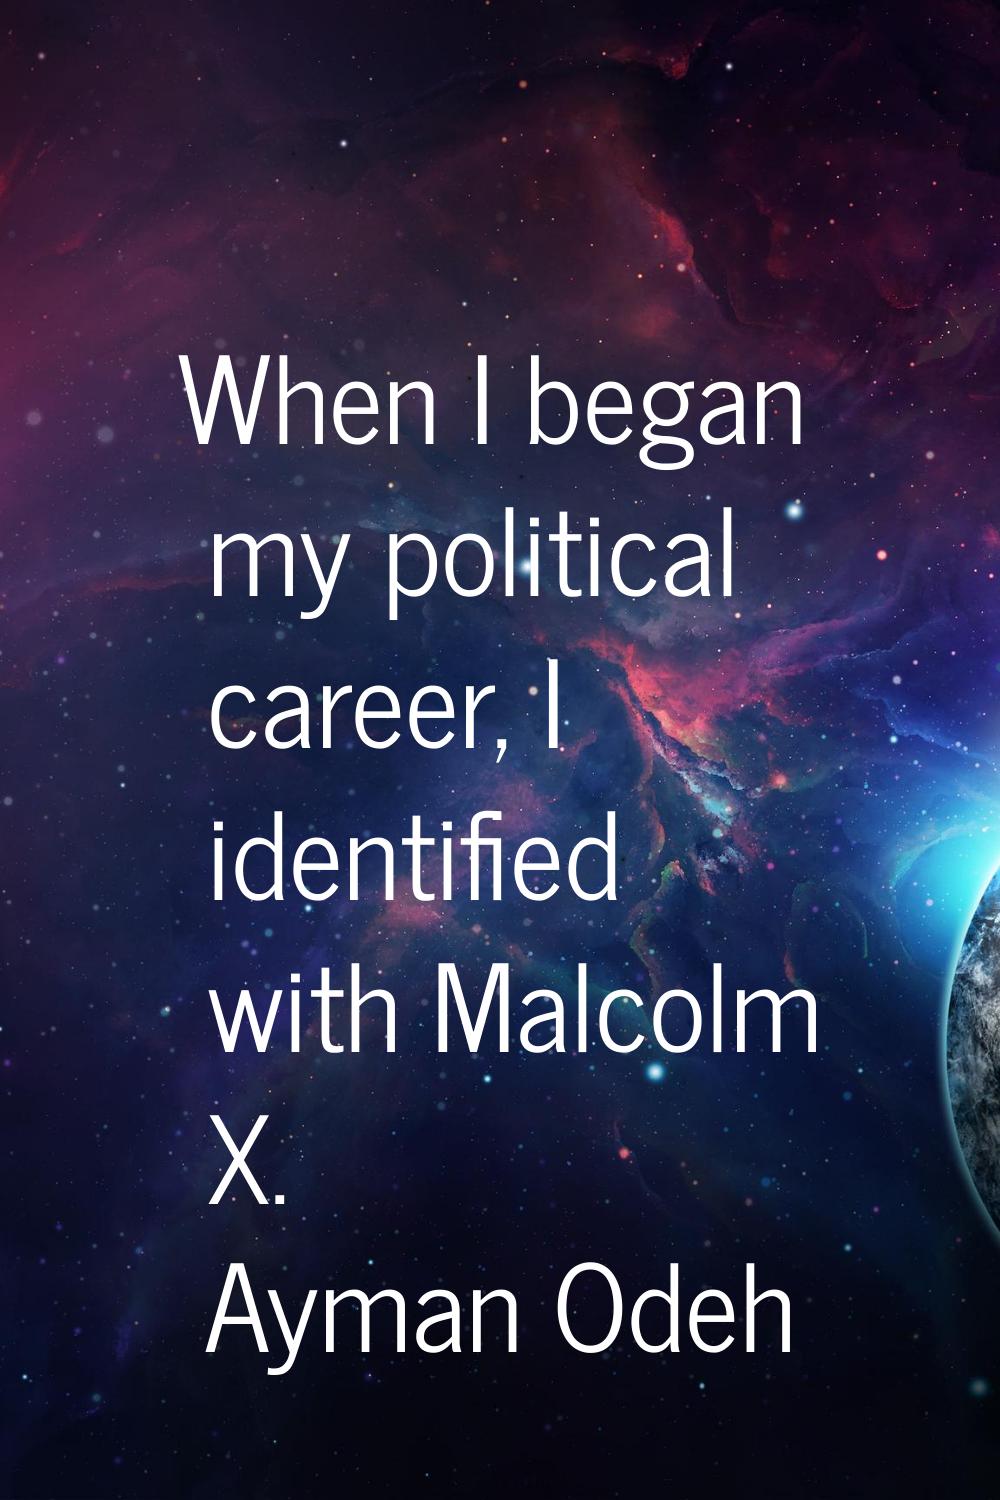 When I began my political career, I identified with Malcolm X.